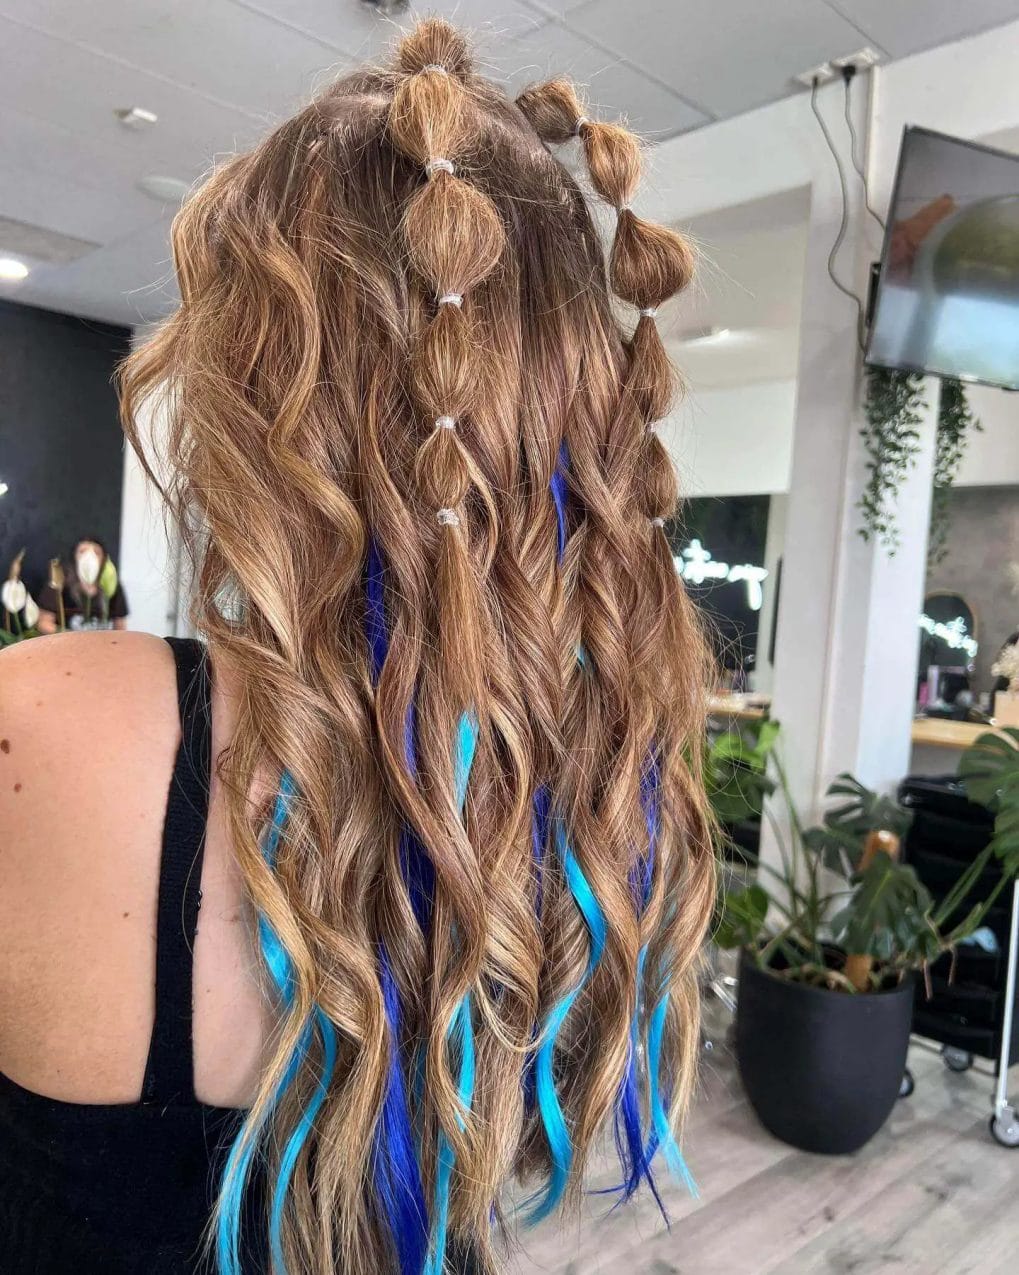 Whimsical buns and beachy waves with bold electric blue extensions, creating a fun, festival-ready hairstyle.